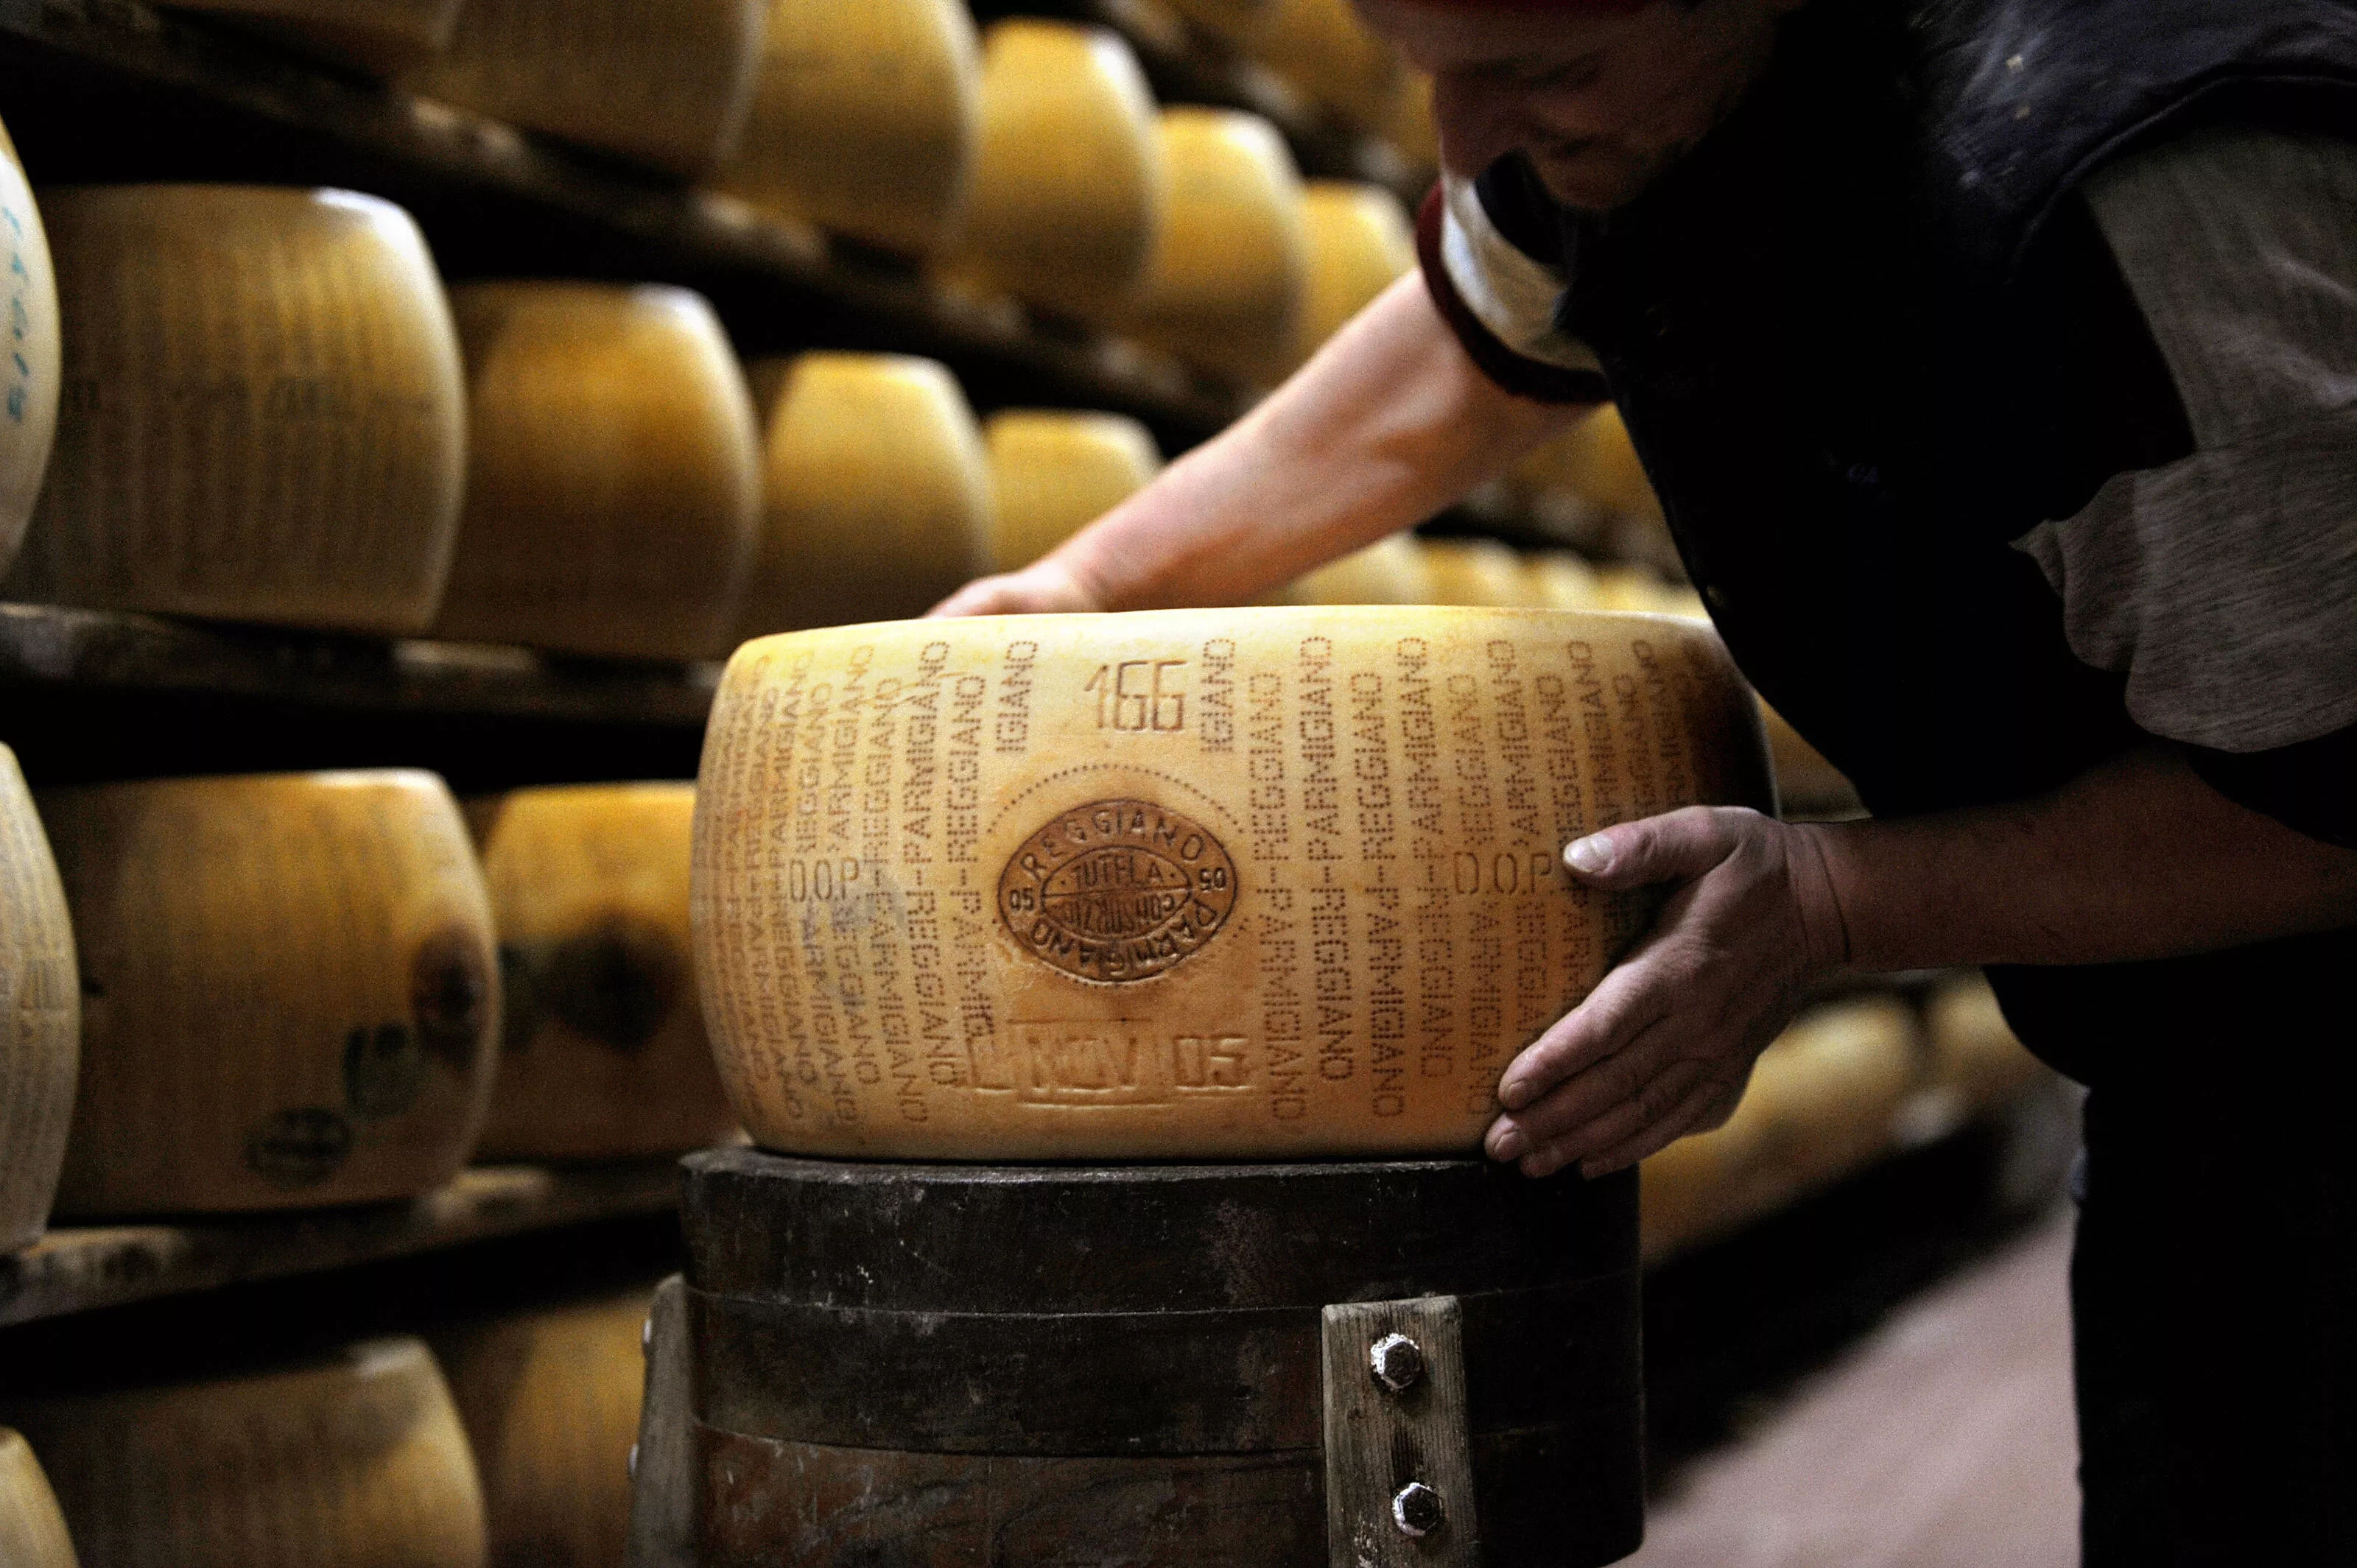 Ambrosi S.p.A. in Italy, Europe | Cheesemakers - Rated 1